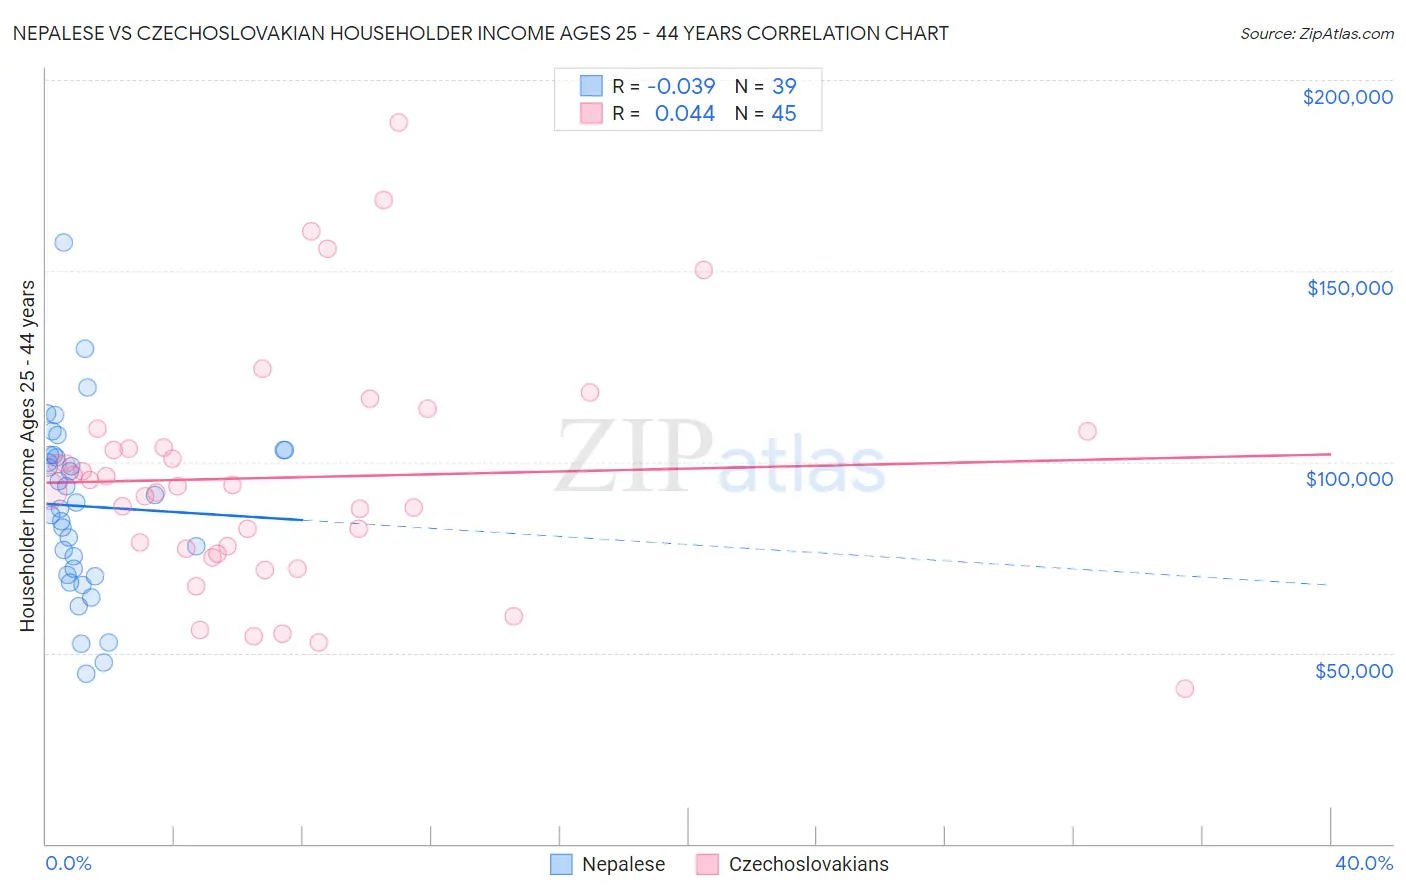 Nepalese vs Czechoslovakian Householder Income Ages 25 - 44 years